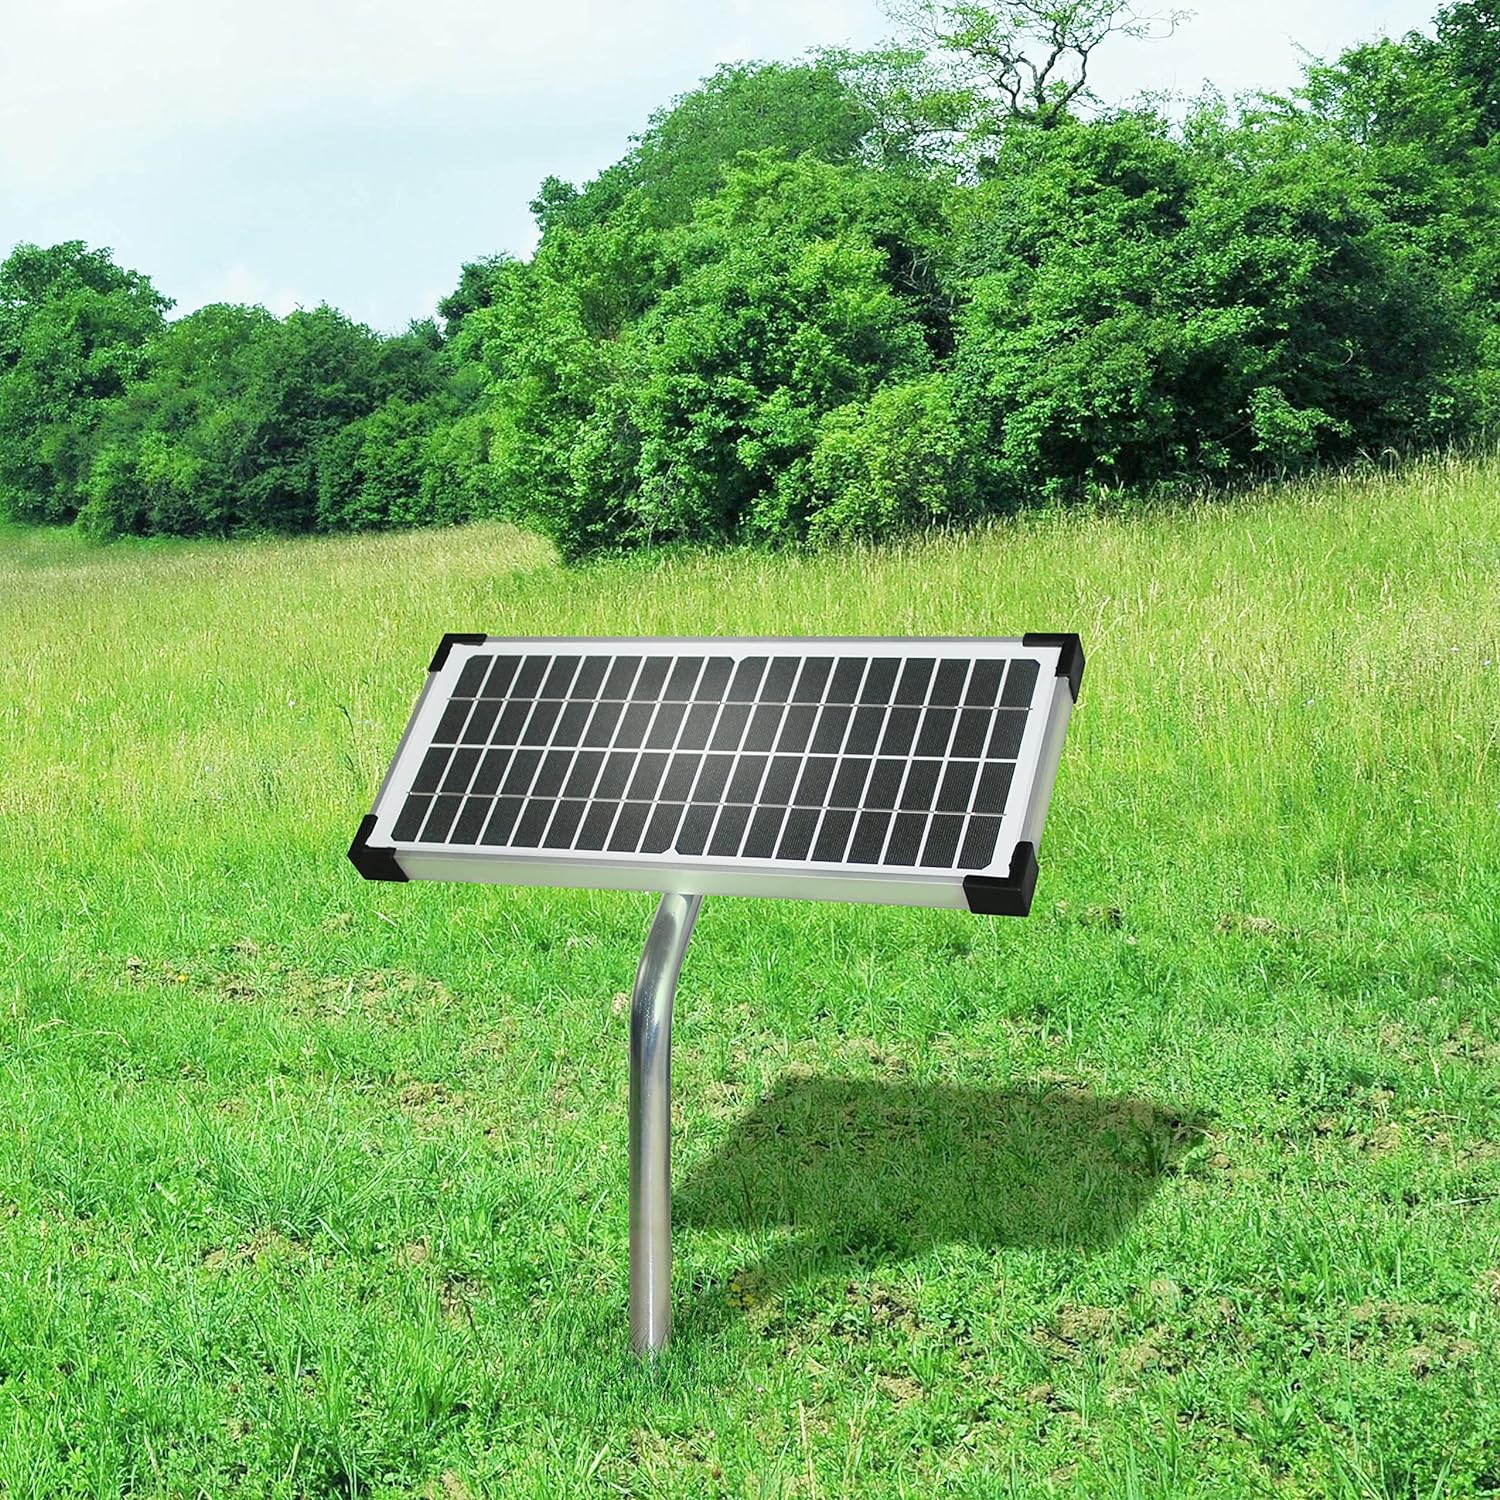 nipponAsia FM123 10 Watt Solar Panel Kit, Compatible with Mighty Mule Automatic Gate Openers